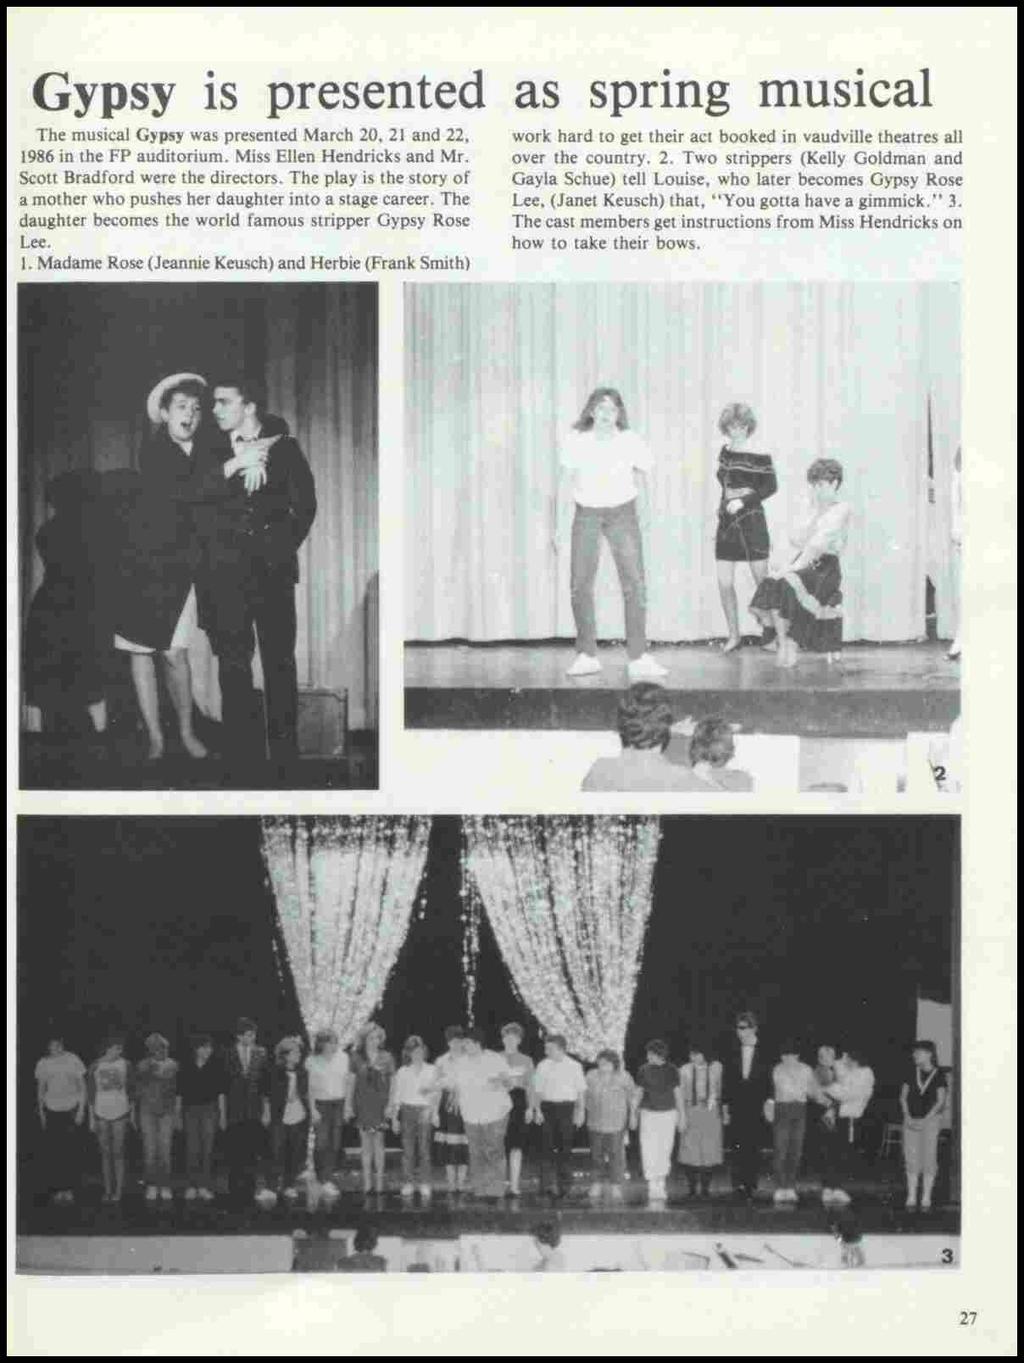 Gypsy ls presented The musical Gypsy was presented March 20, 21 and 22, 1986 in the FP auditorium. Miss Ellen Hendricks and Mr. Scott Bradford were the directors.